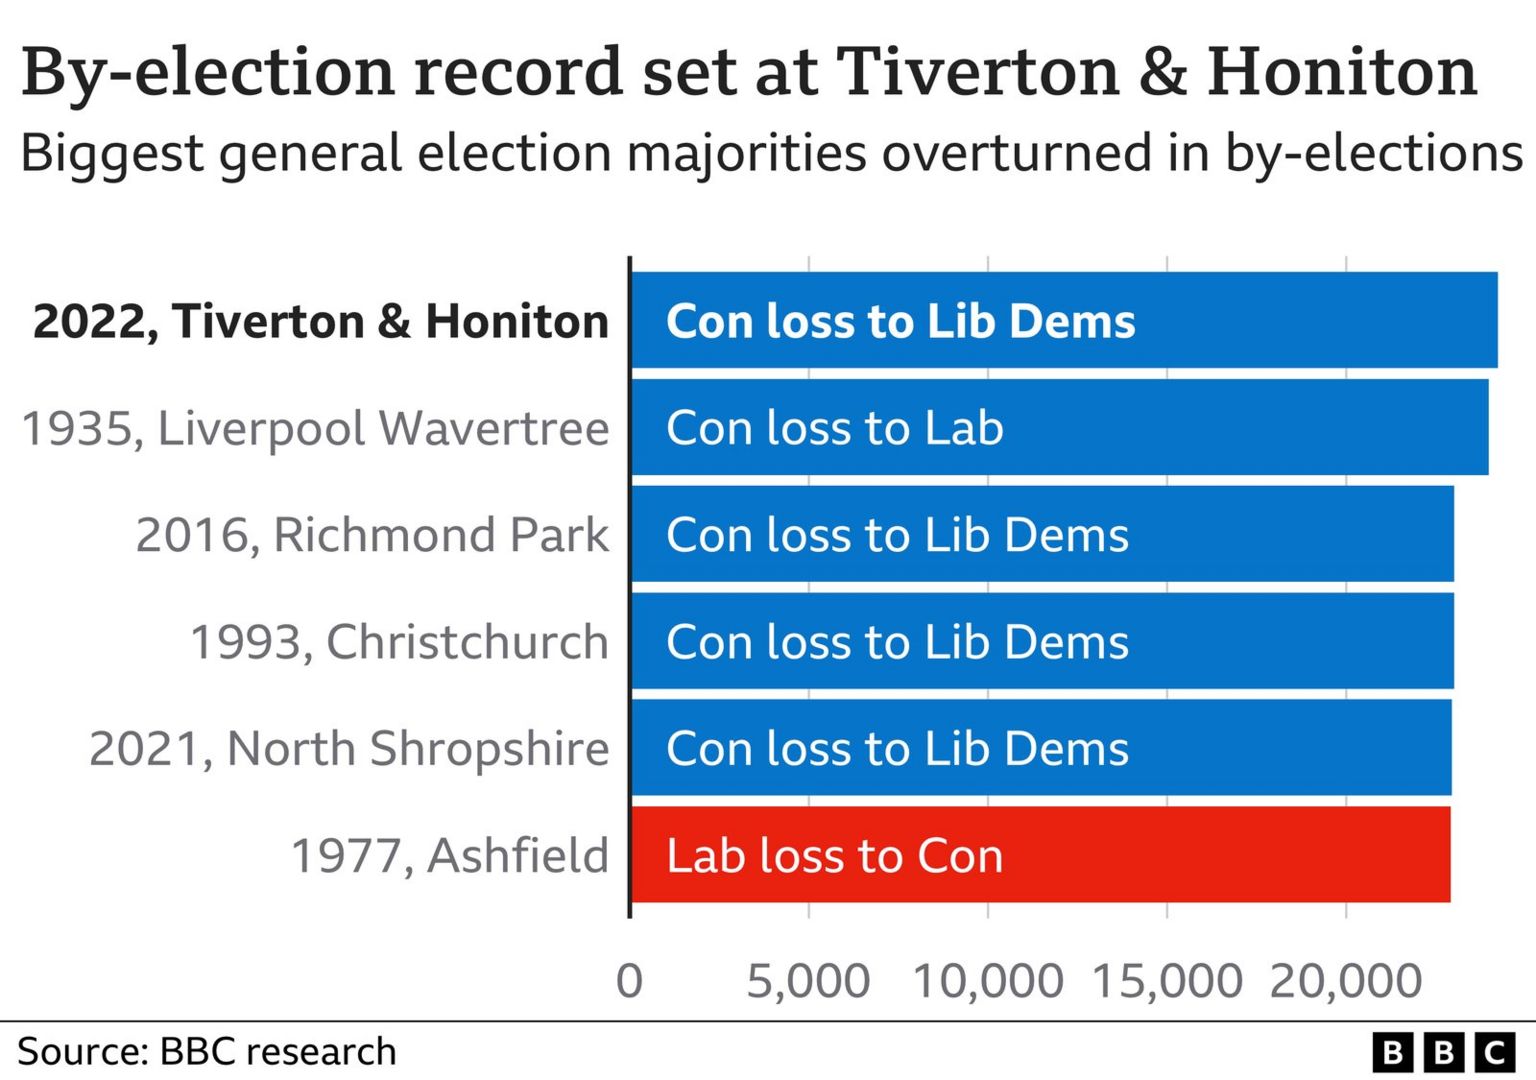 By-election results